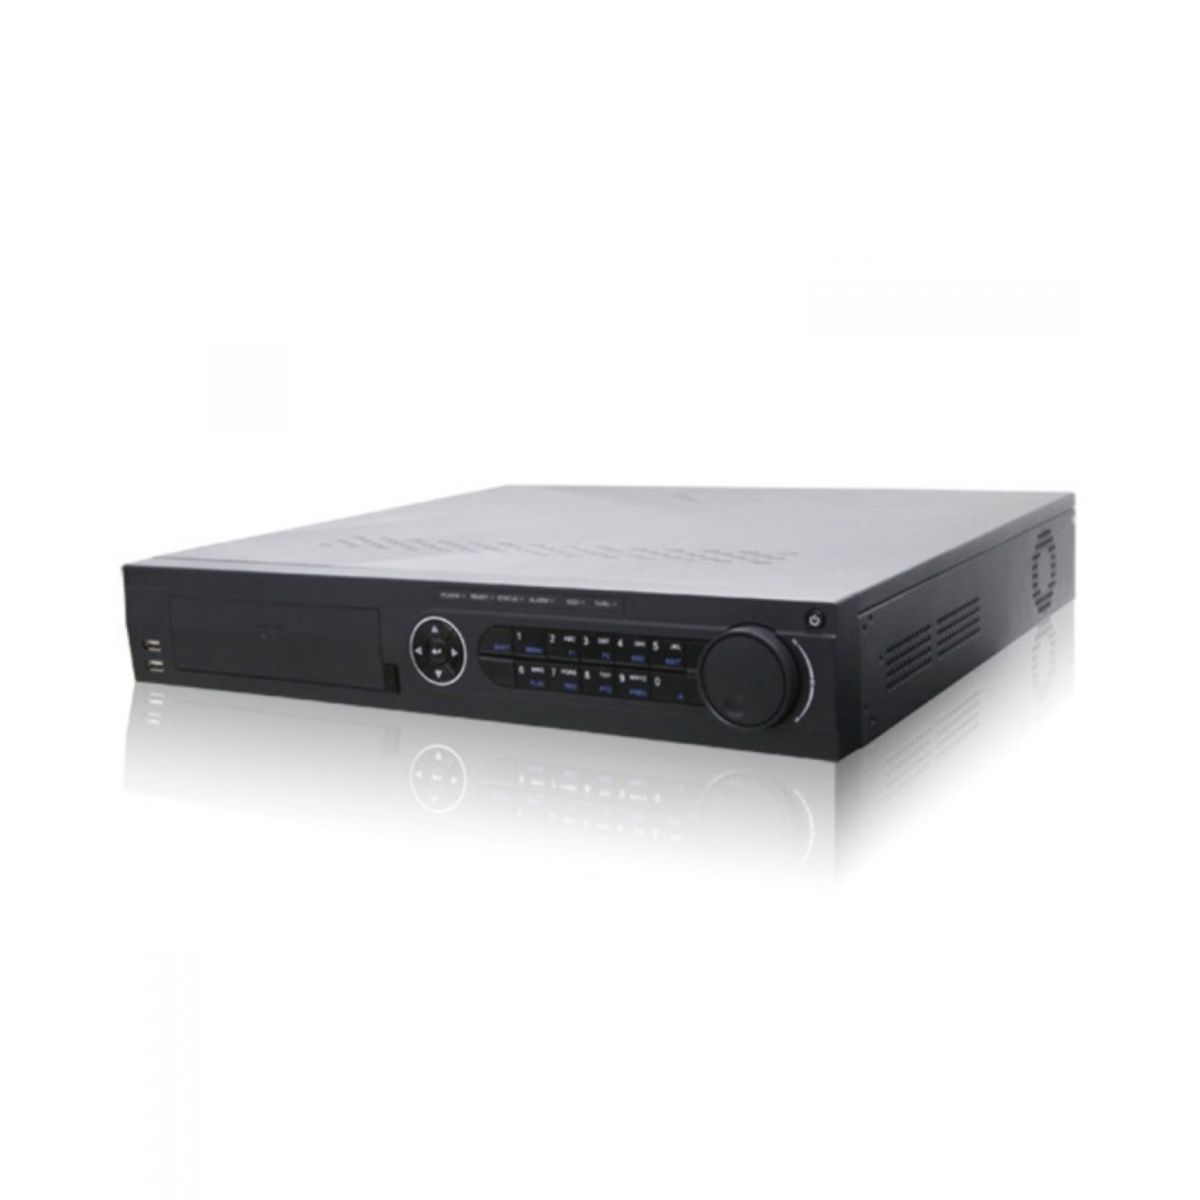 NVR Hikvision 32 canales DS-7732NI-E4/16P